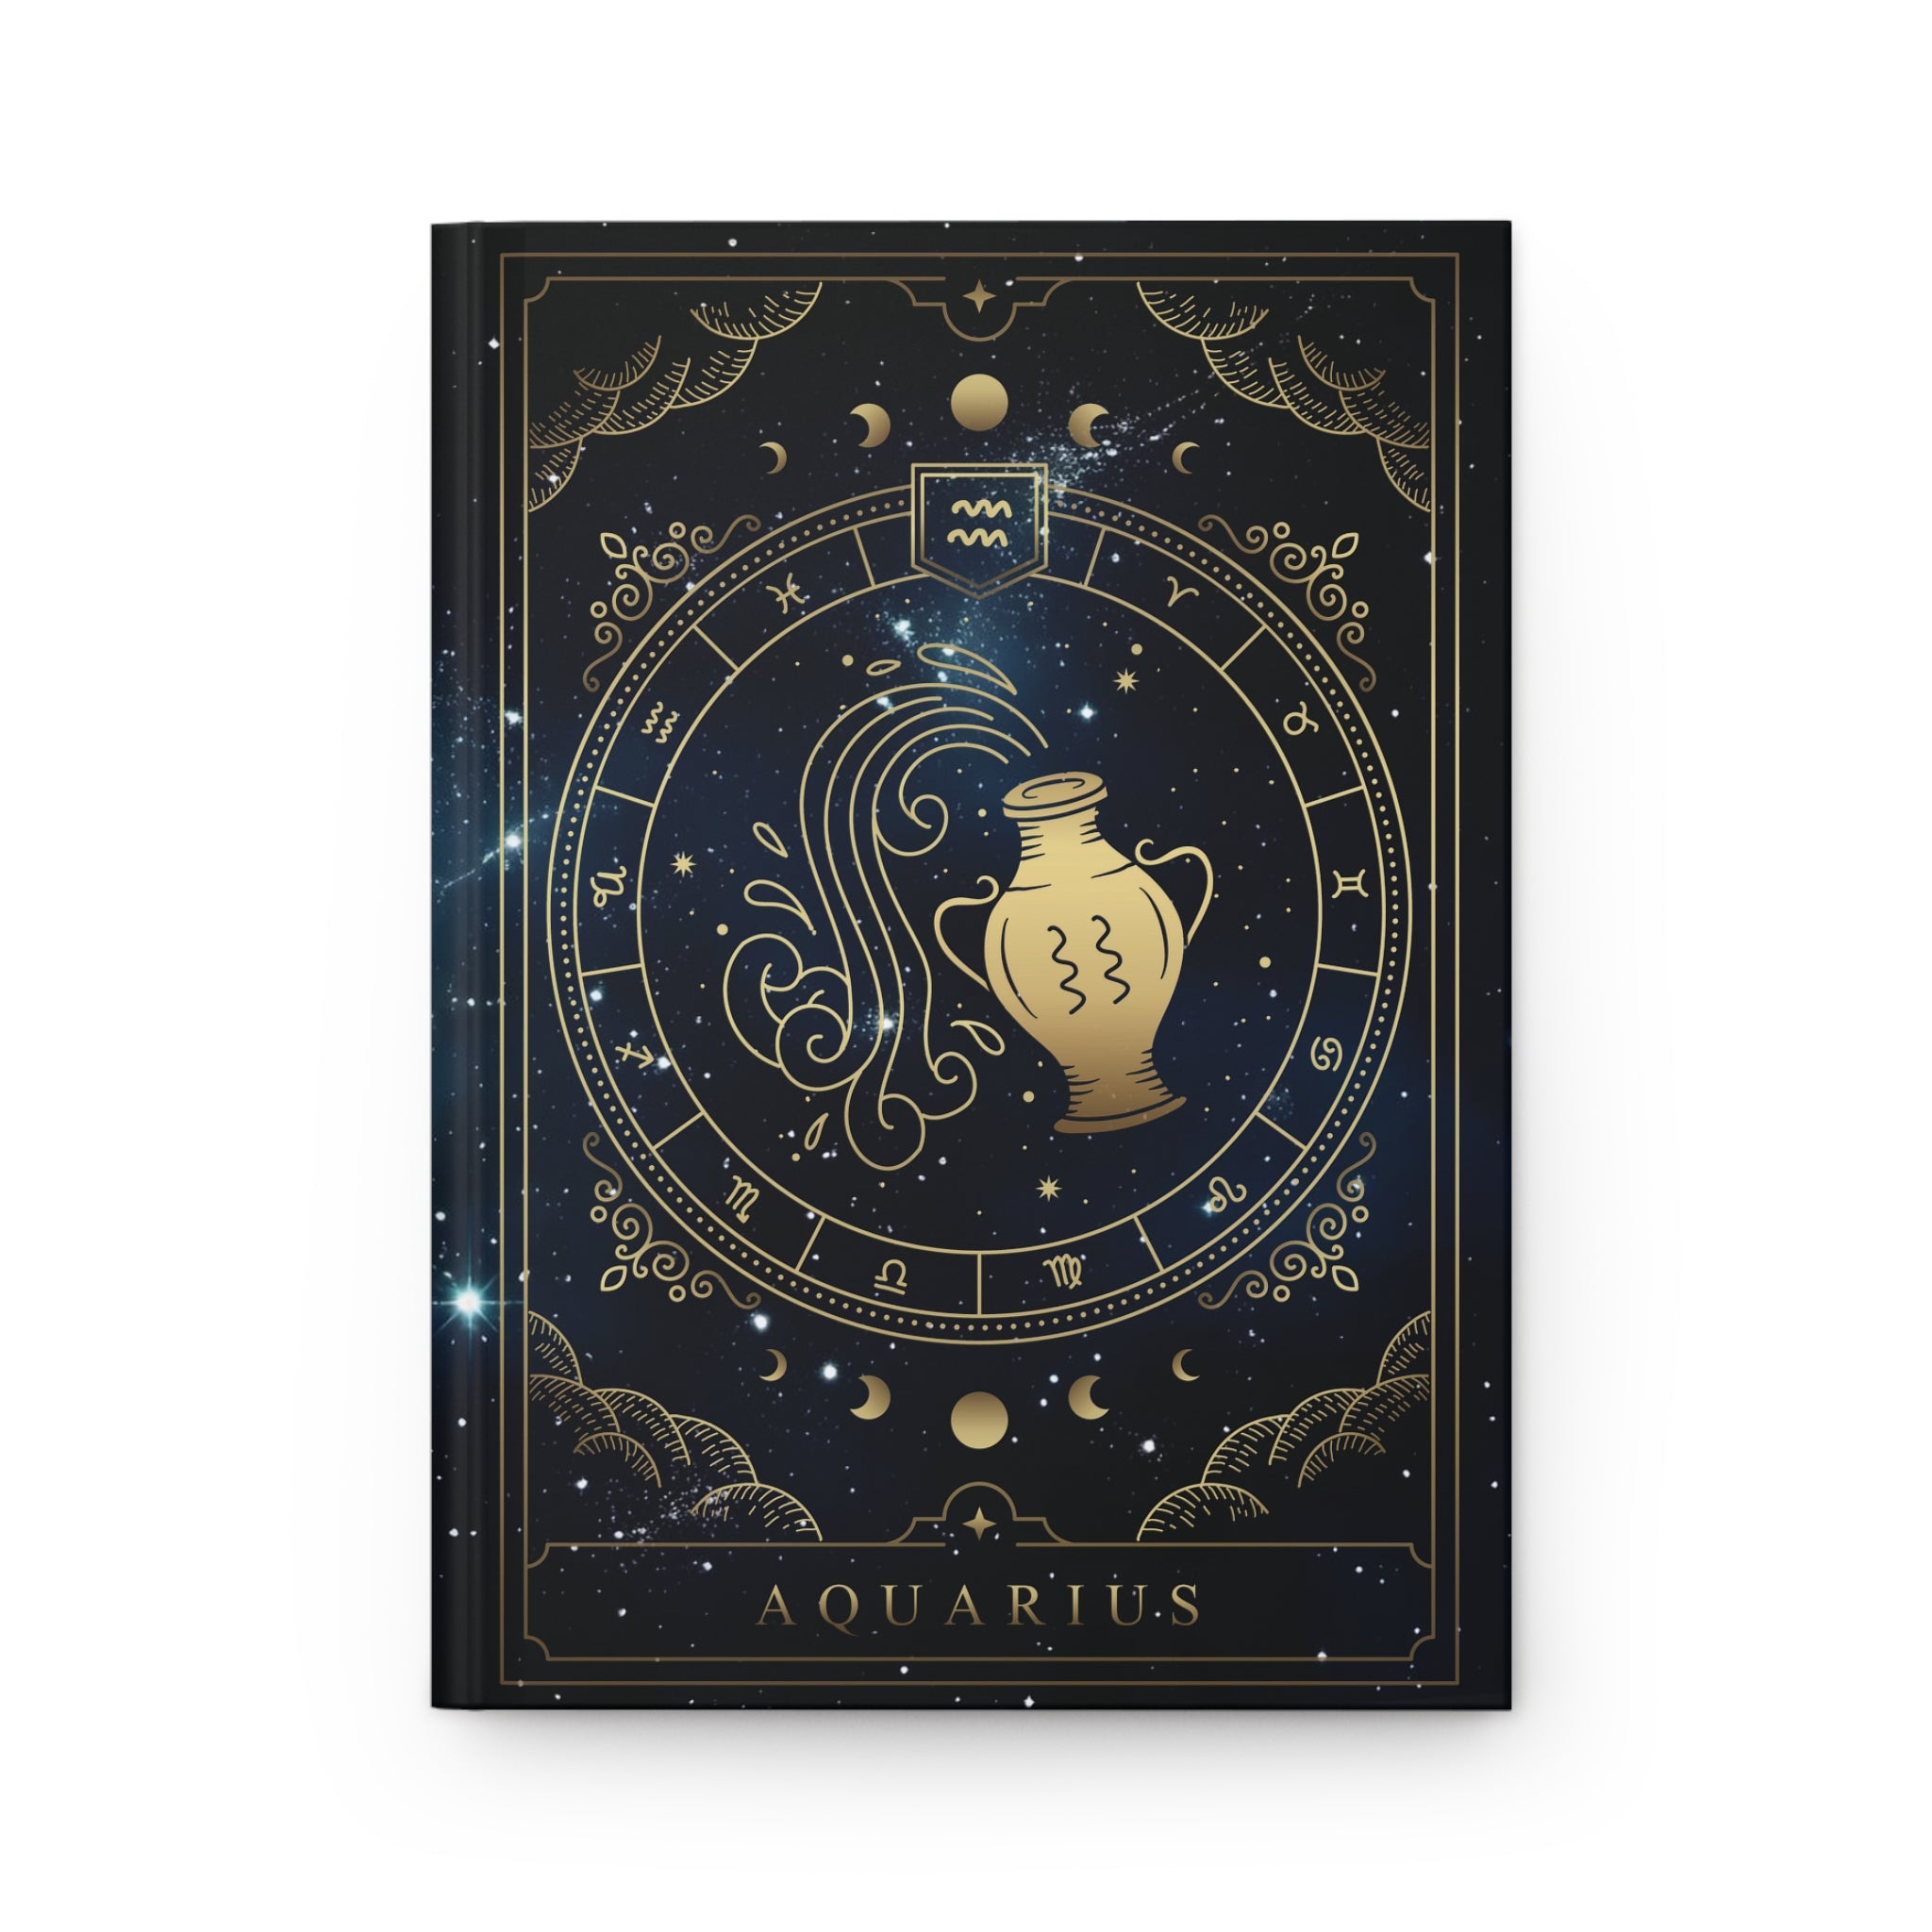 Aquarius Horoscope Zodiac Matte Hardcover Journal  Rule Lined Pages for the Visionary Aquarius